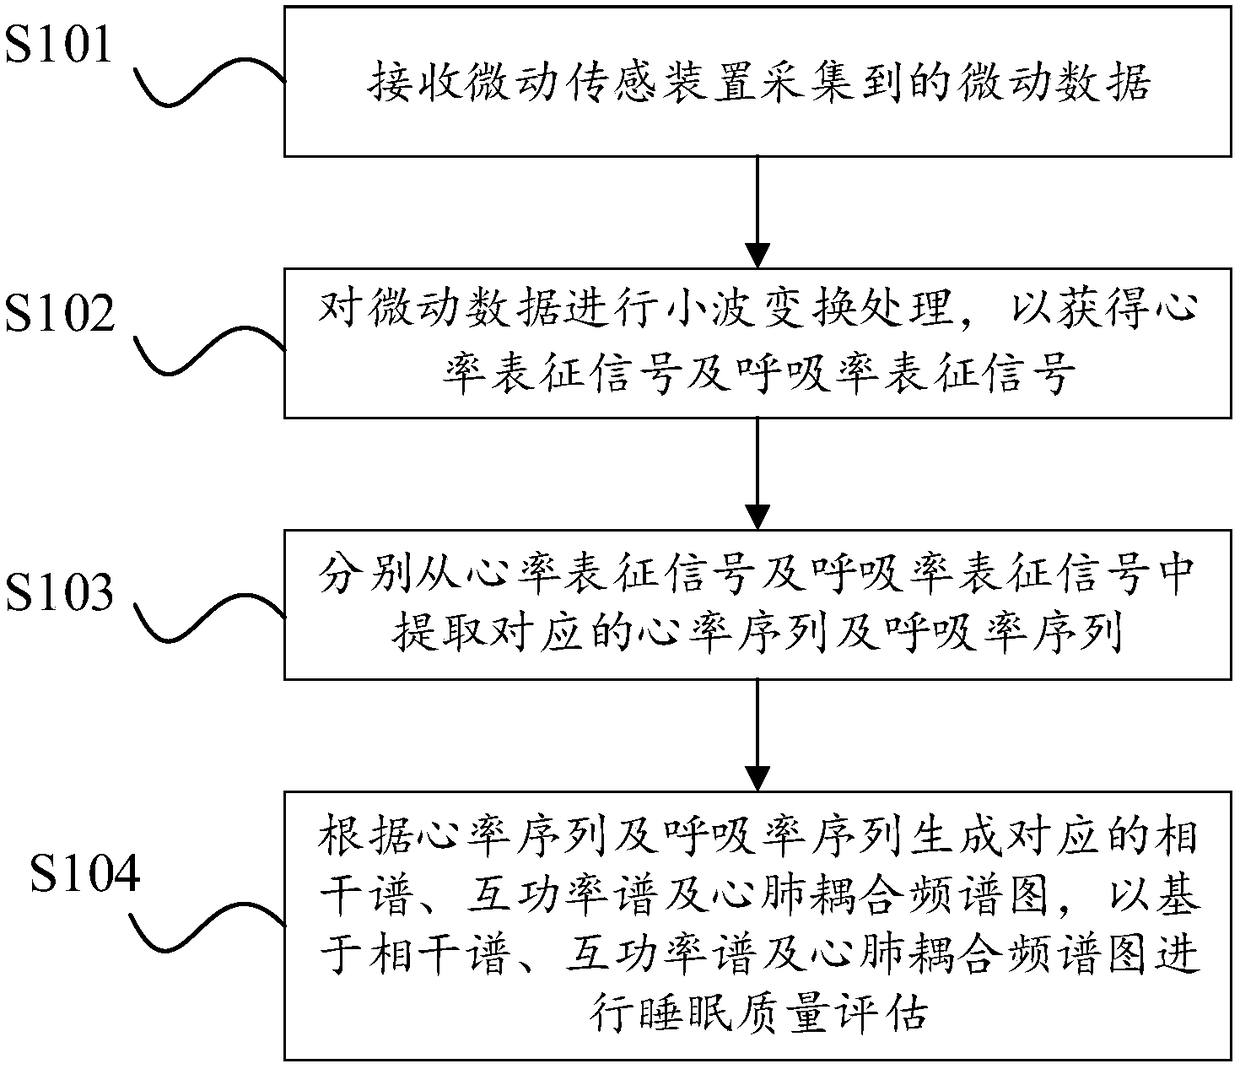 Non-contact sleep assessment method and device based on CPC